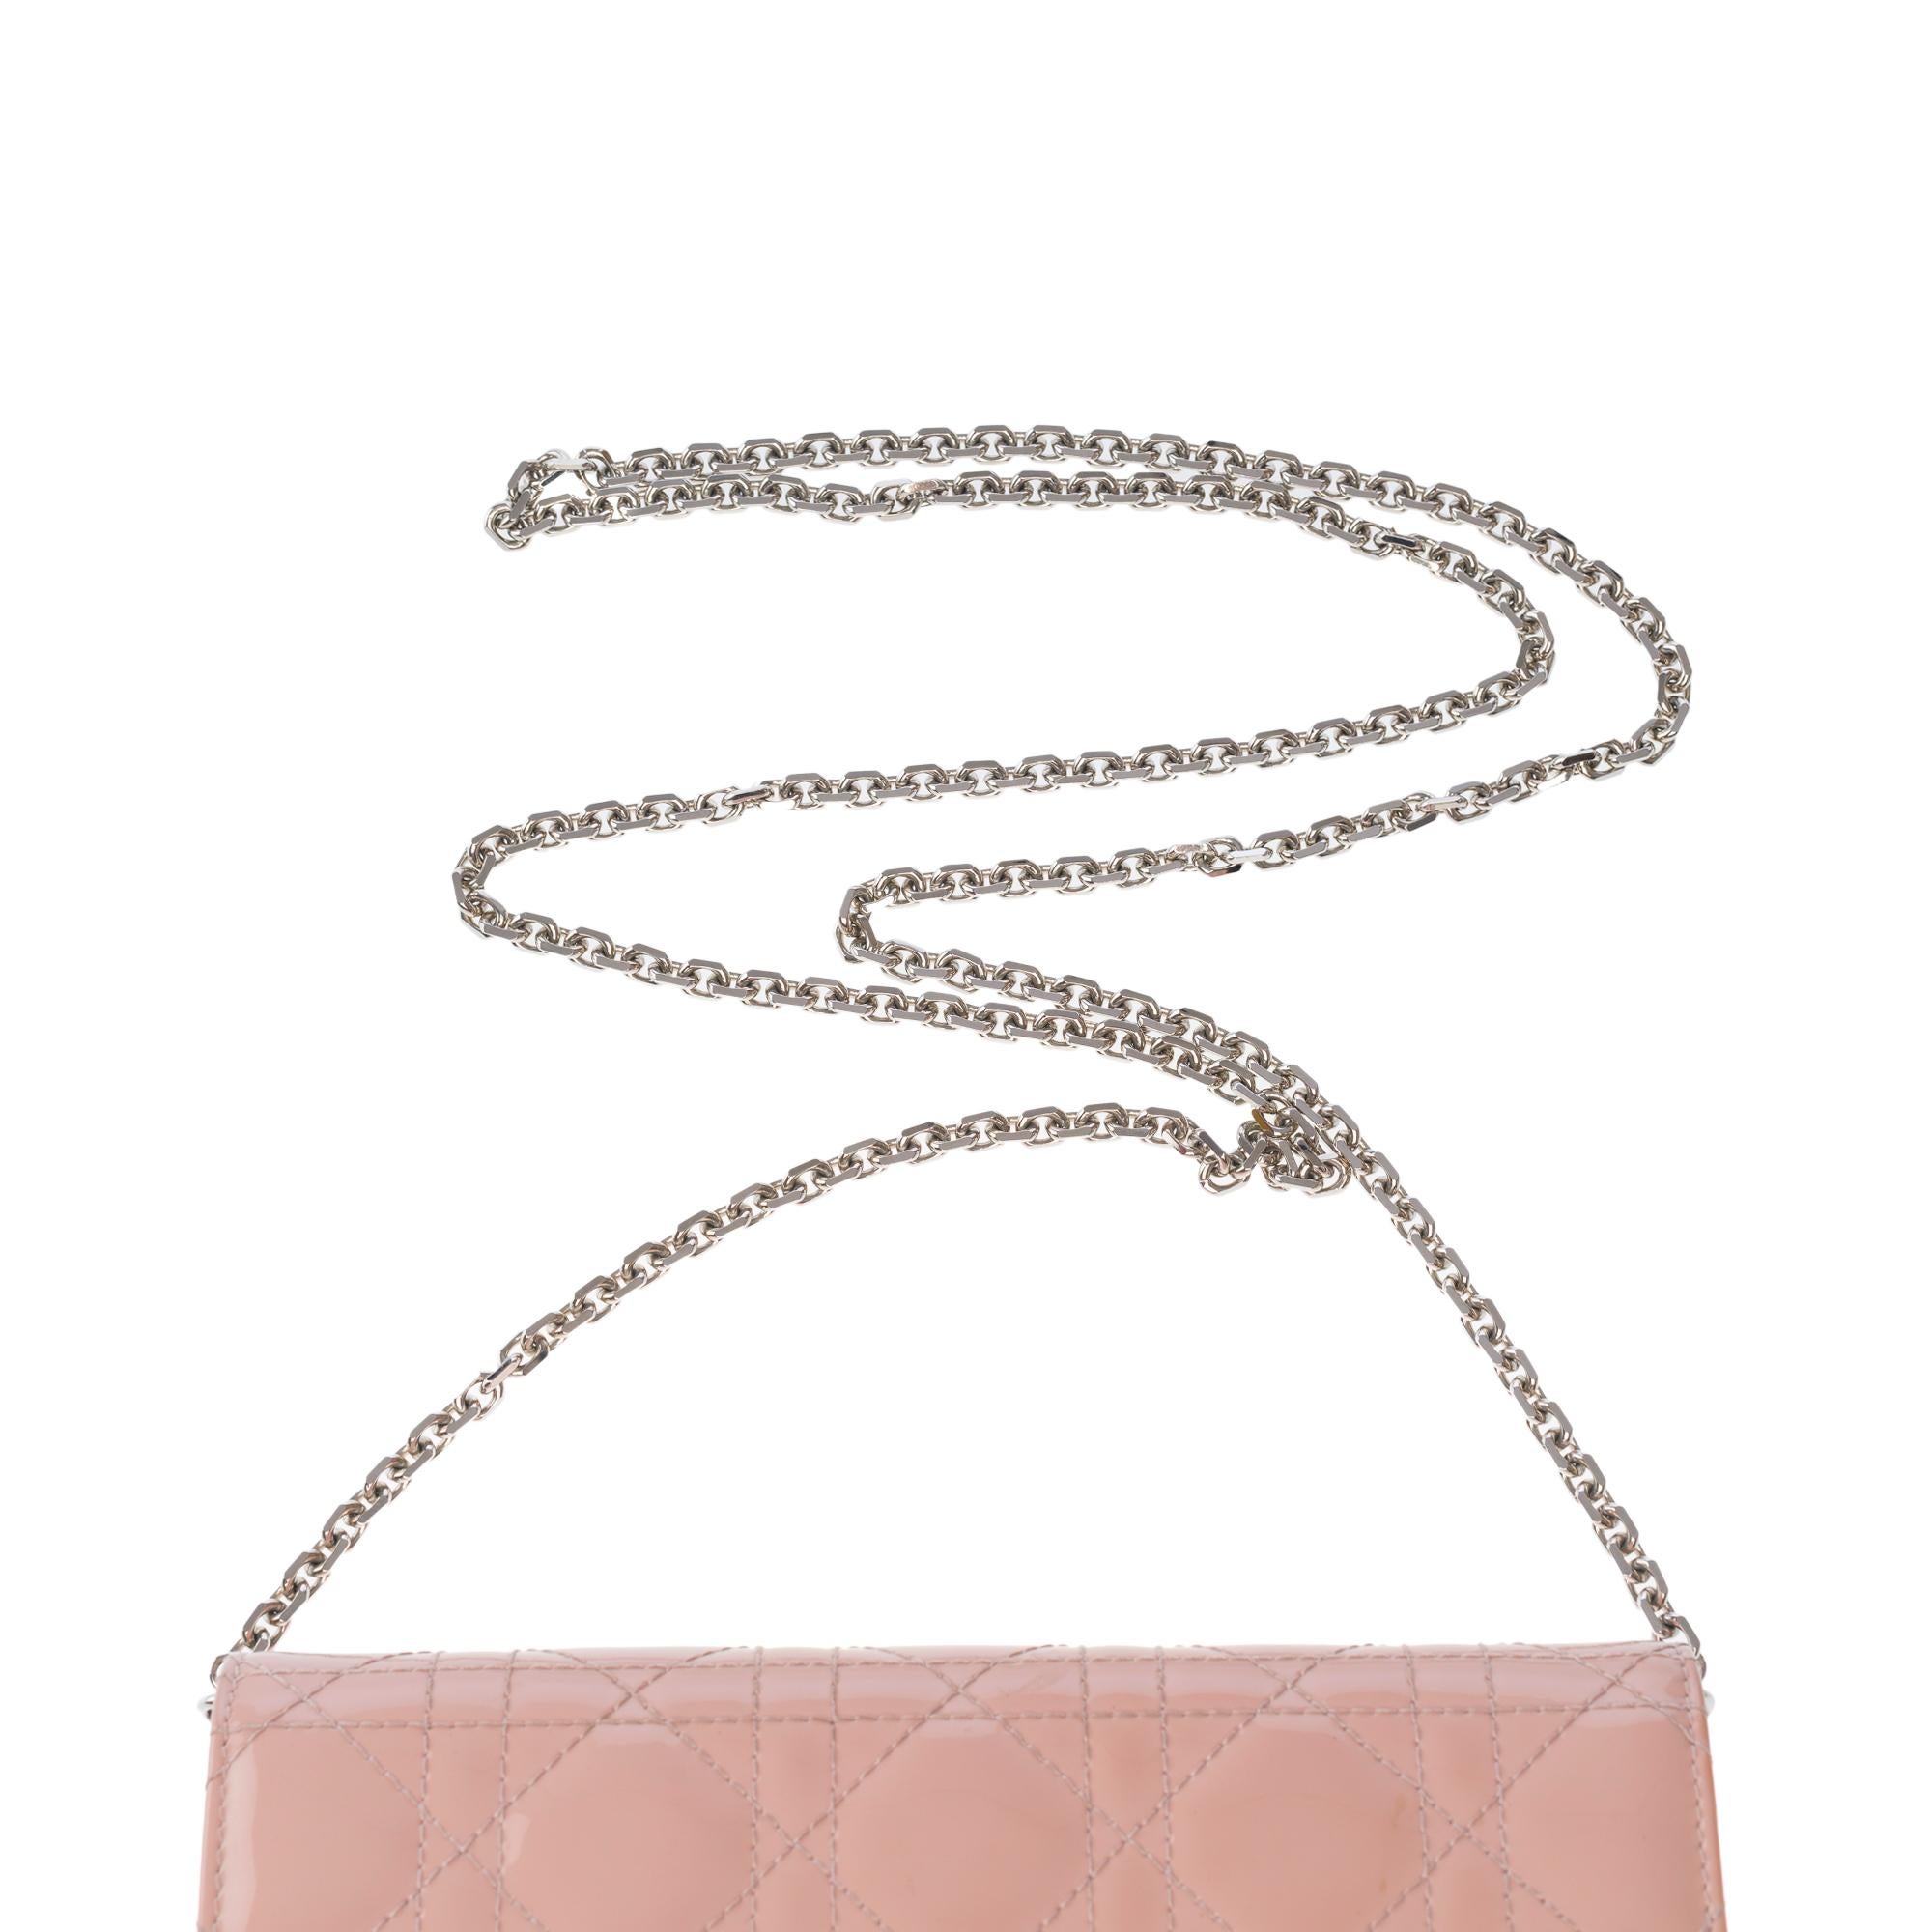 Christian Dior Wallet On Chain in patent pink cane leather , SHW 6